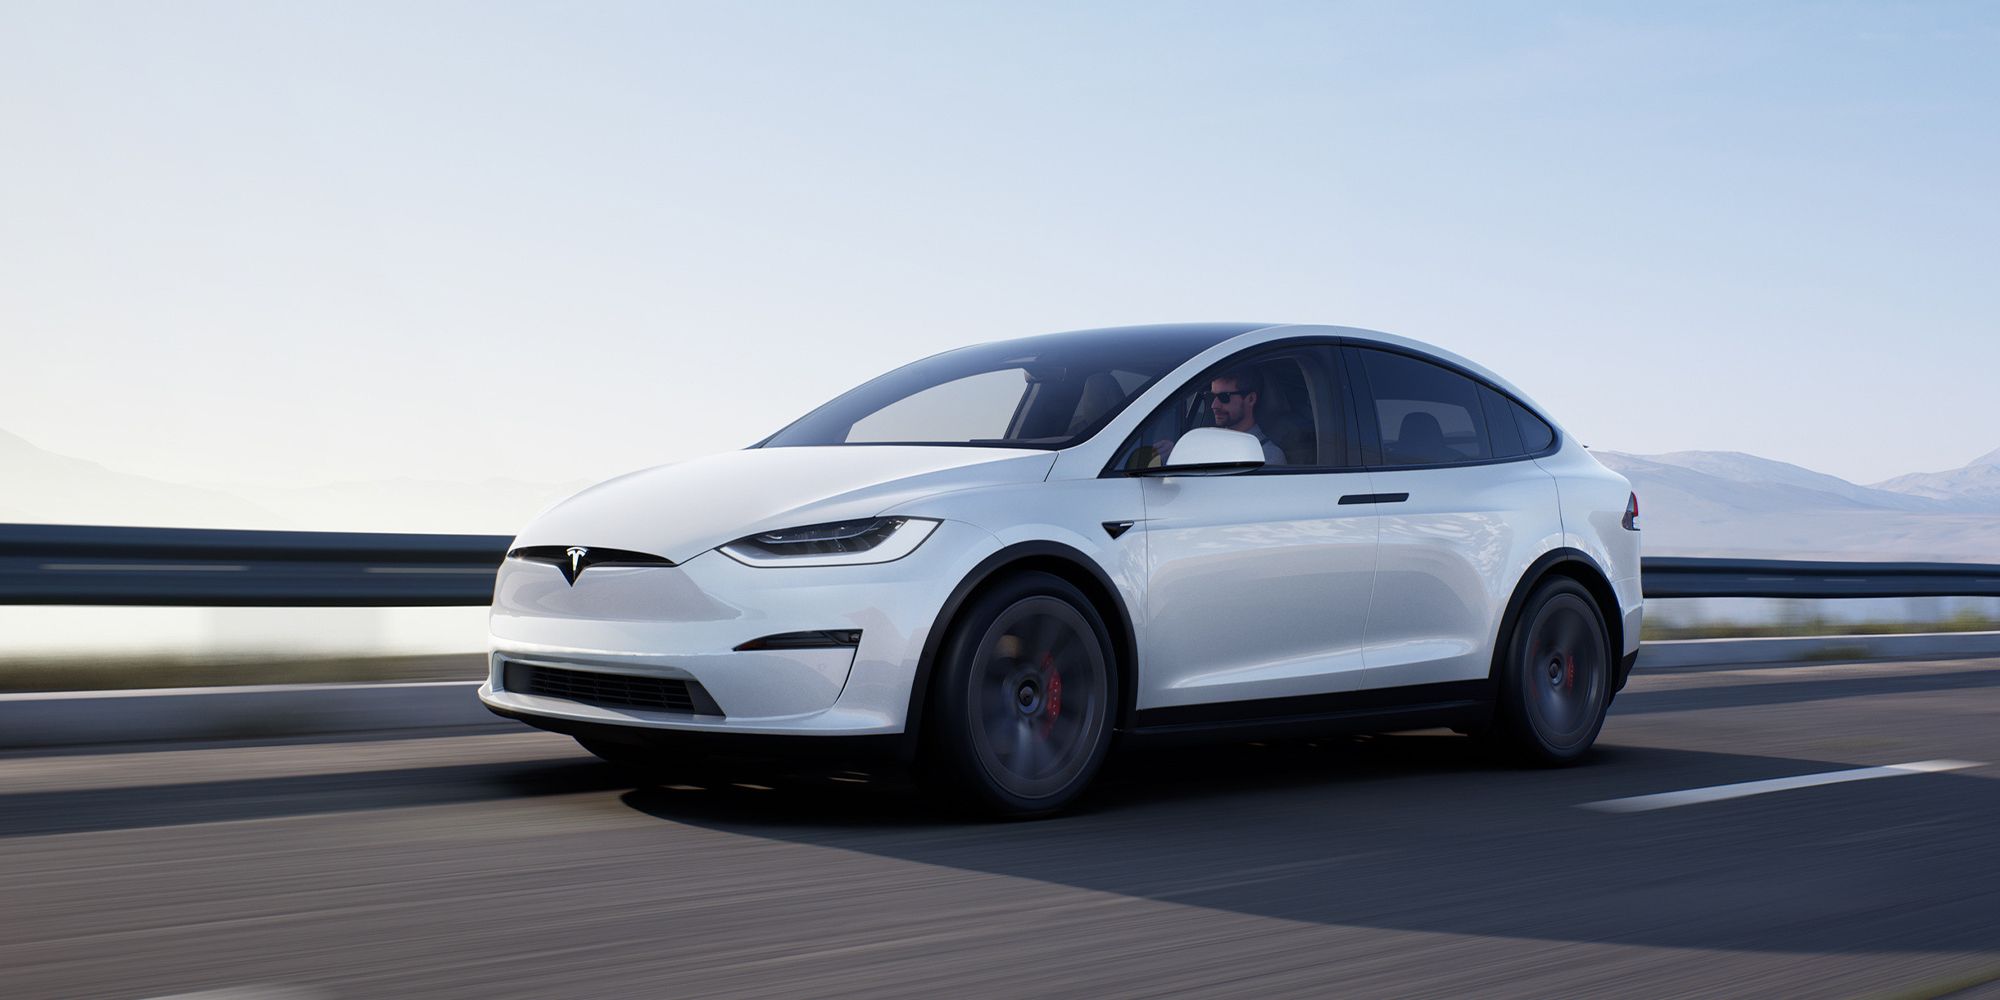 The front of the facelifted Model X